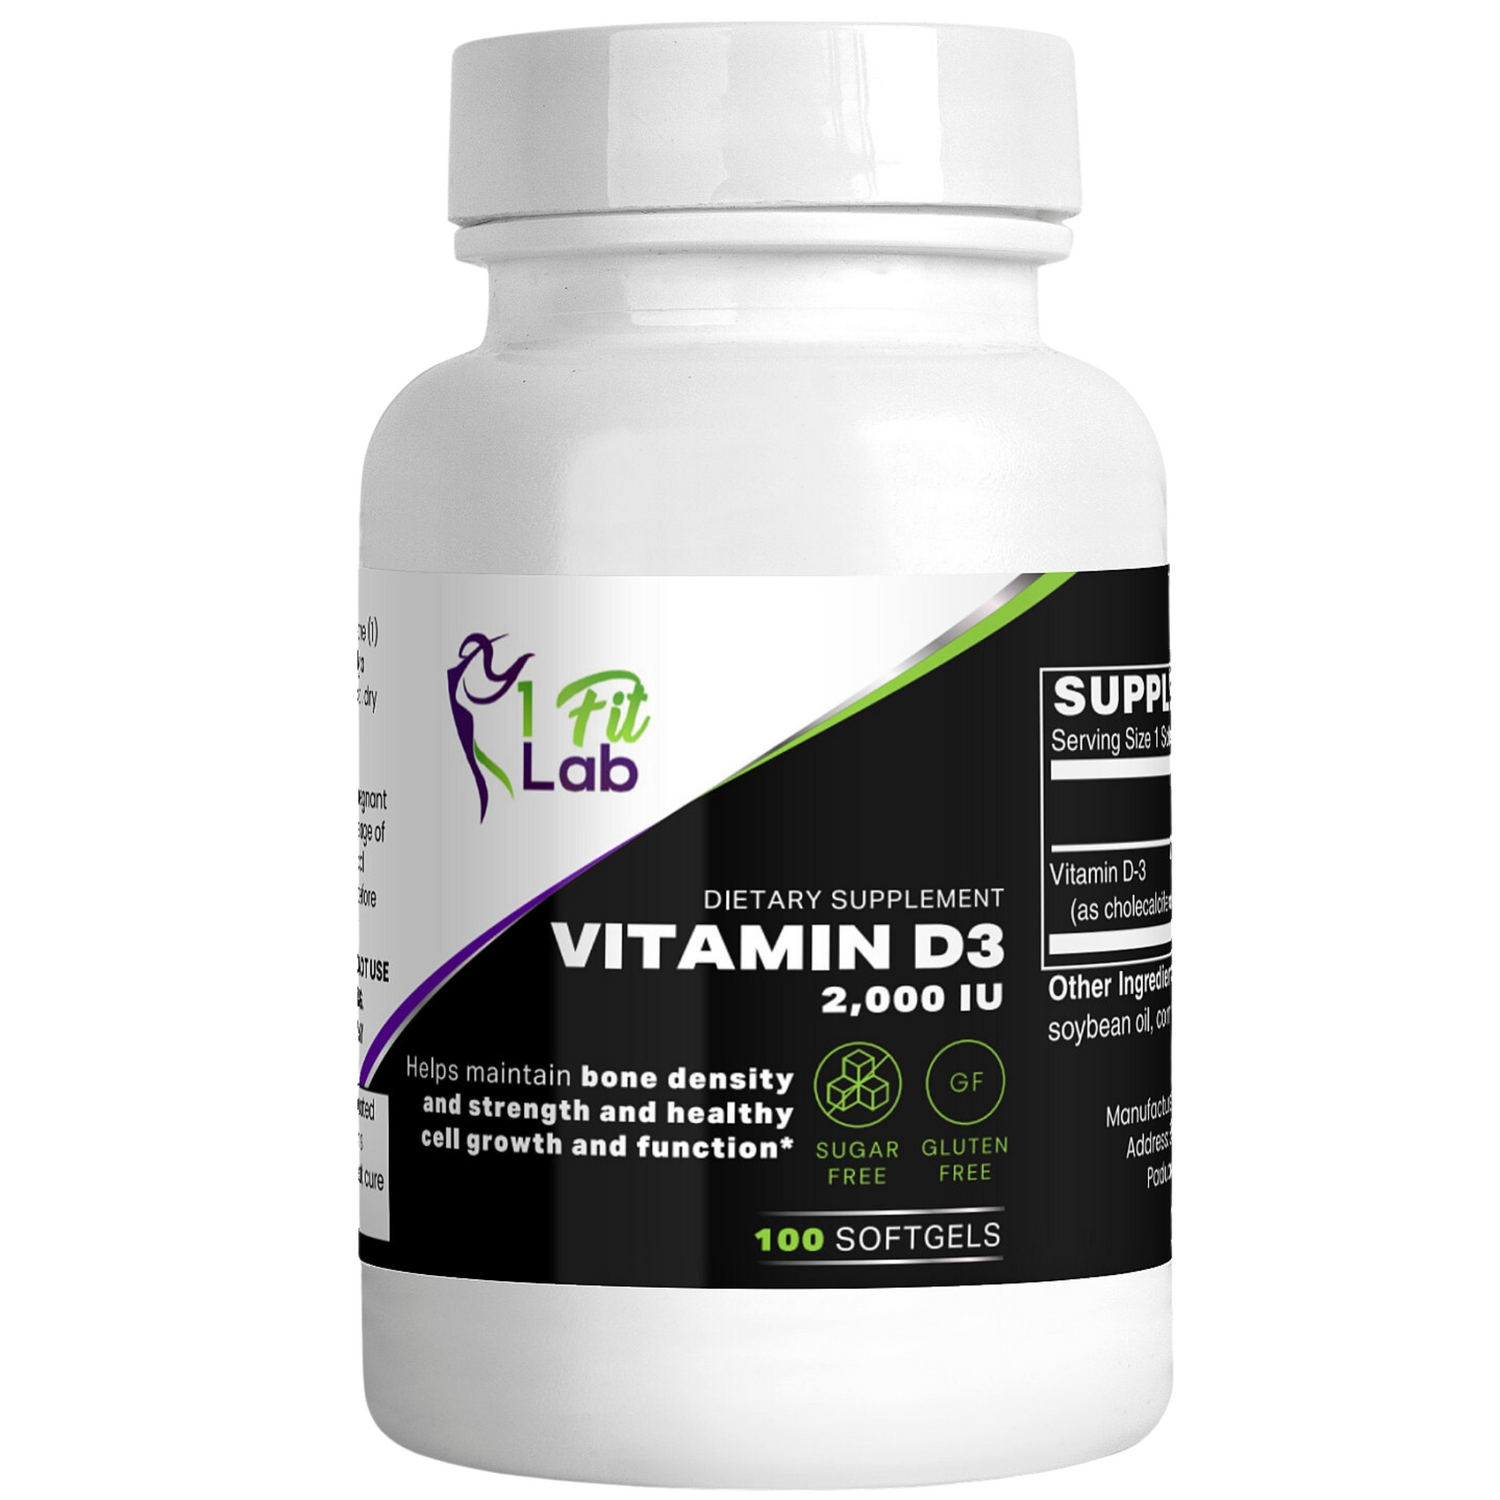 Bottle of Vitamin D3 2000 IU supplement for bone health and energy